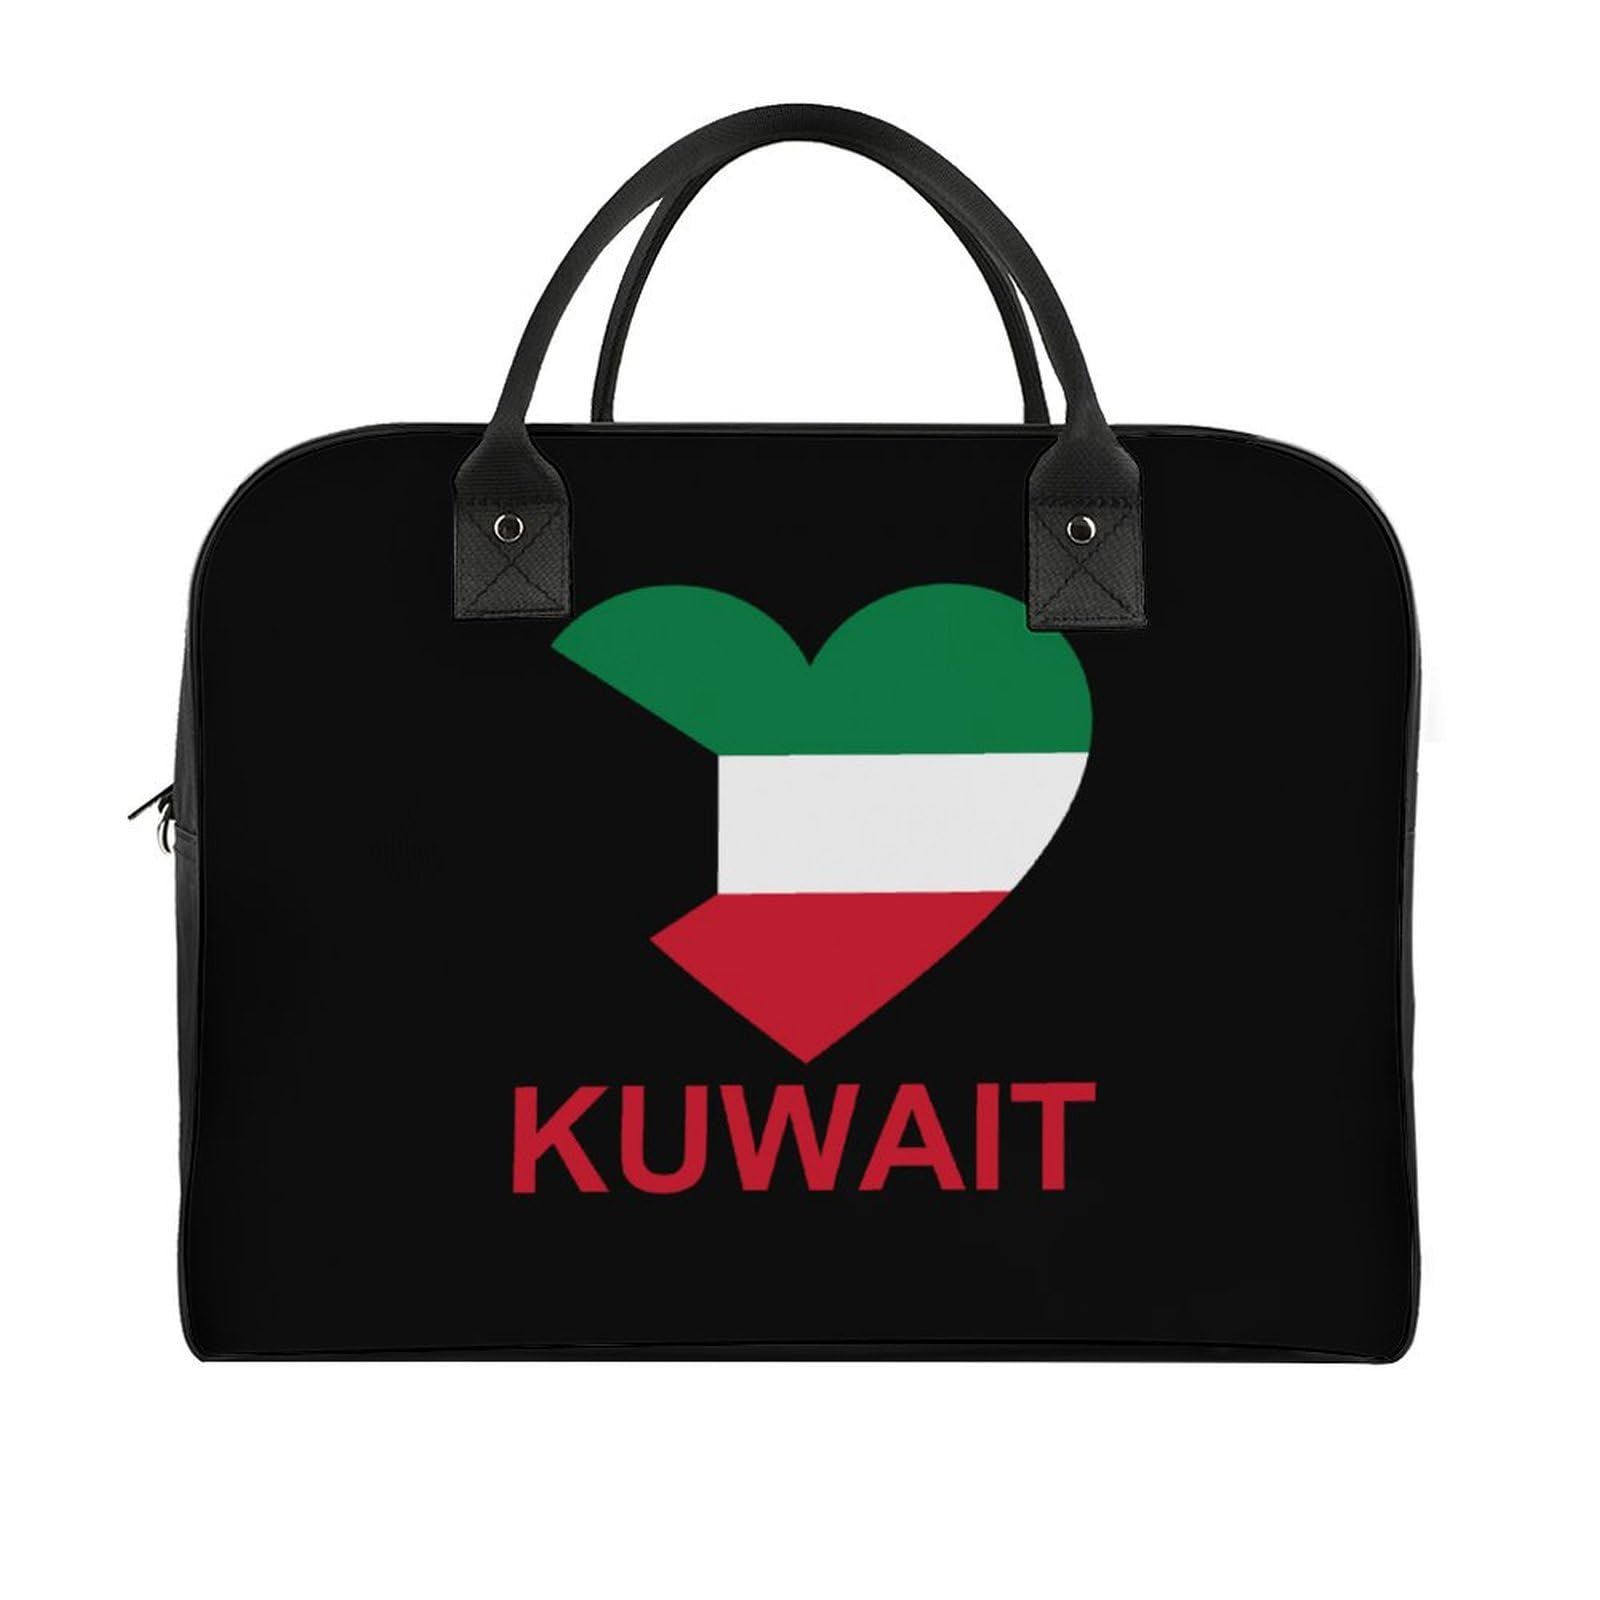 Love Kuwait Large Crossbody Bag Laptop Bags Shoulder Handbags Tote with Strap for Travel Office